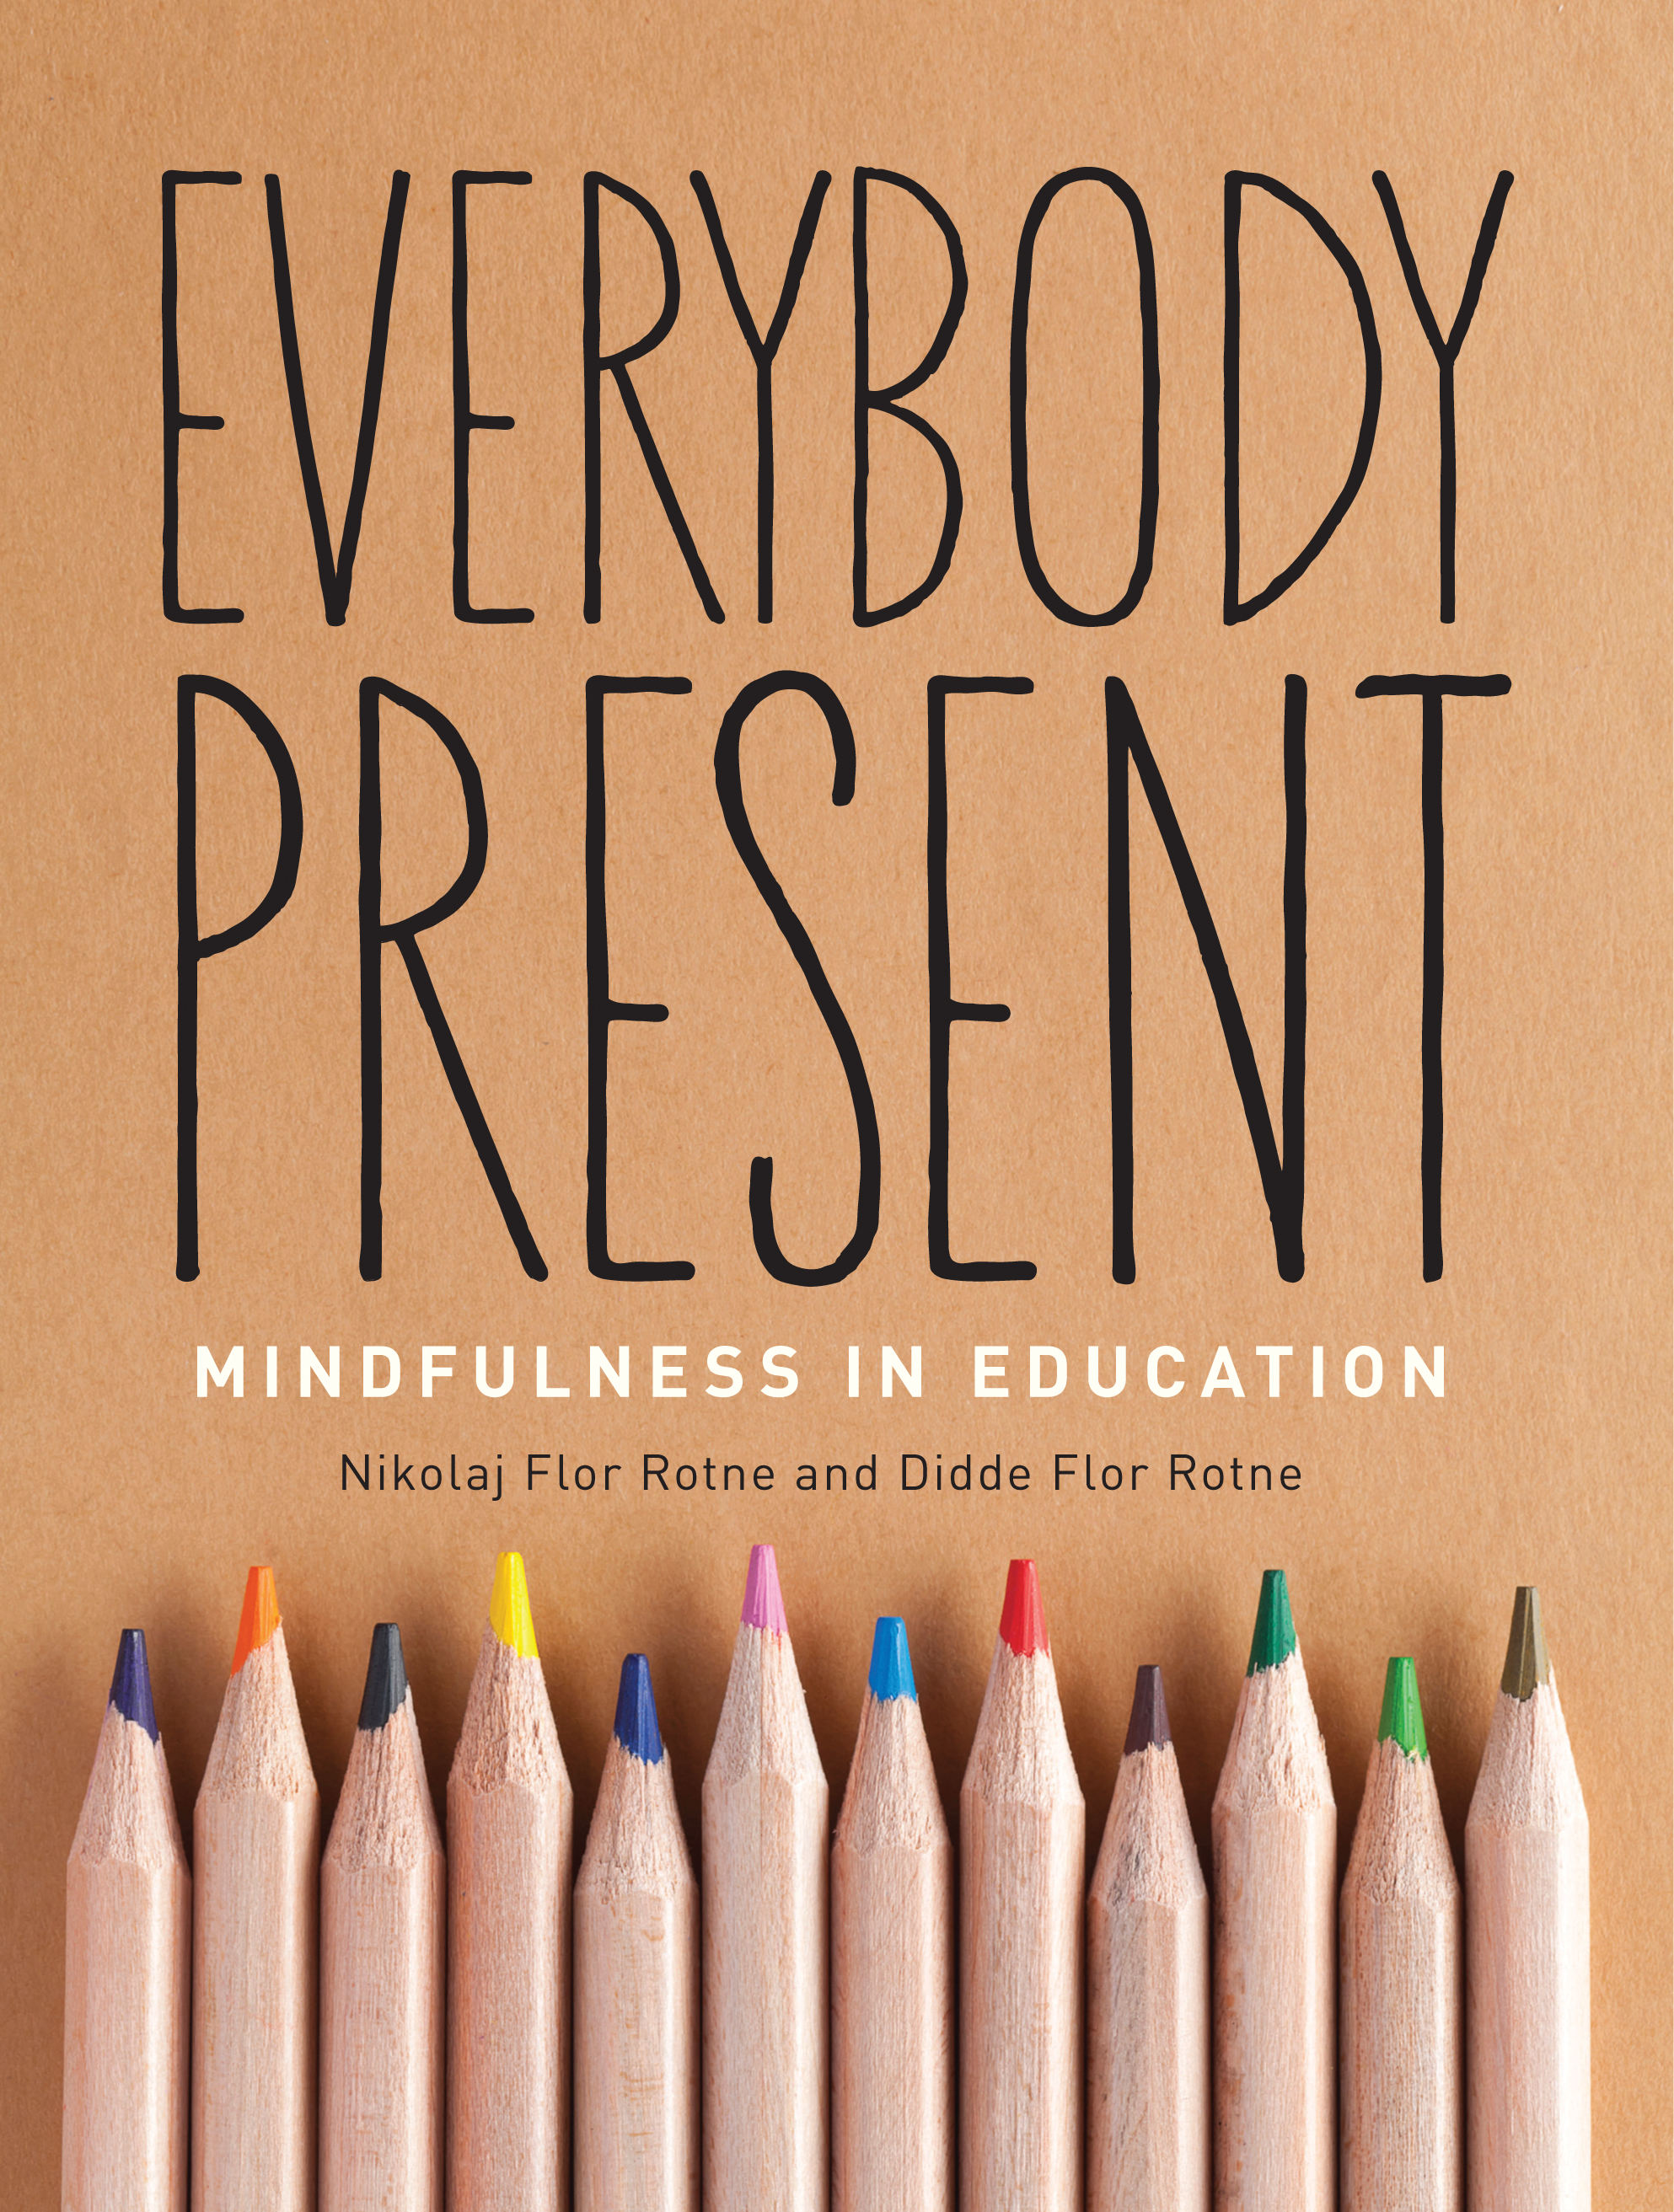 Everybody Present Mindfulness in Education